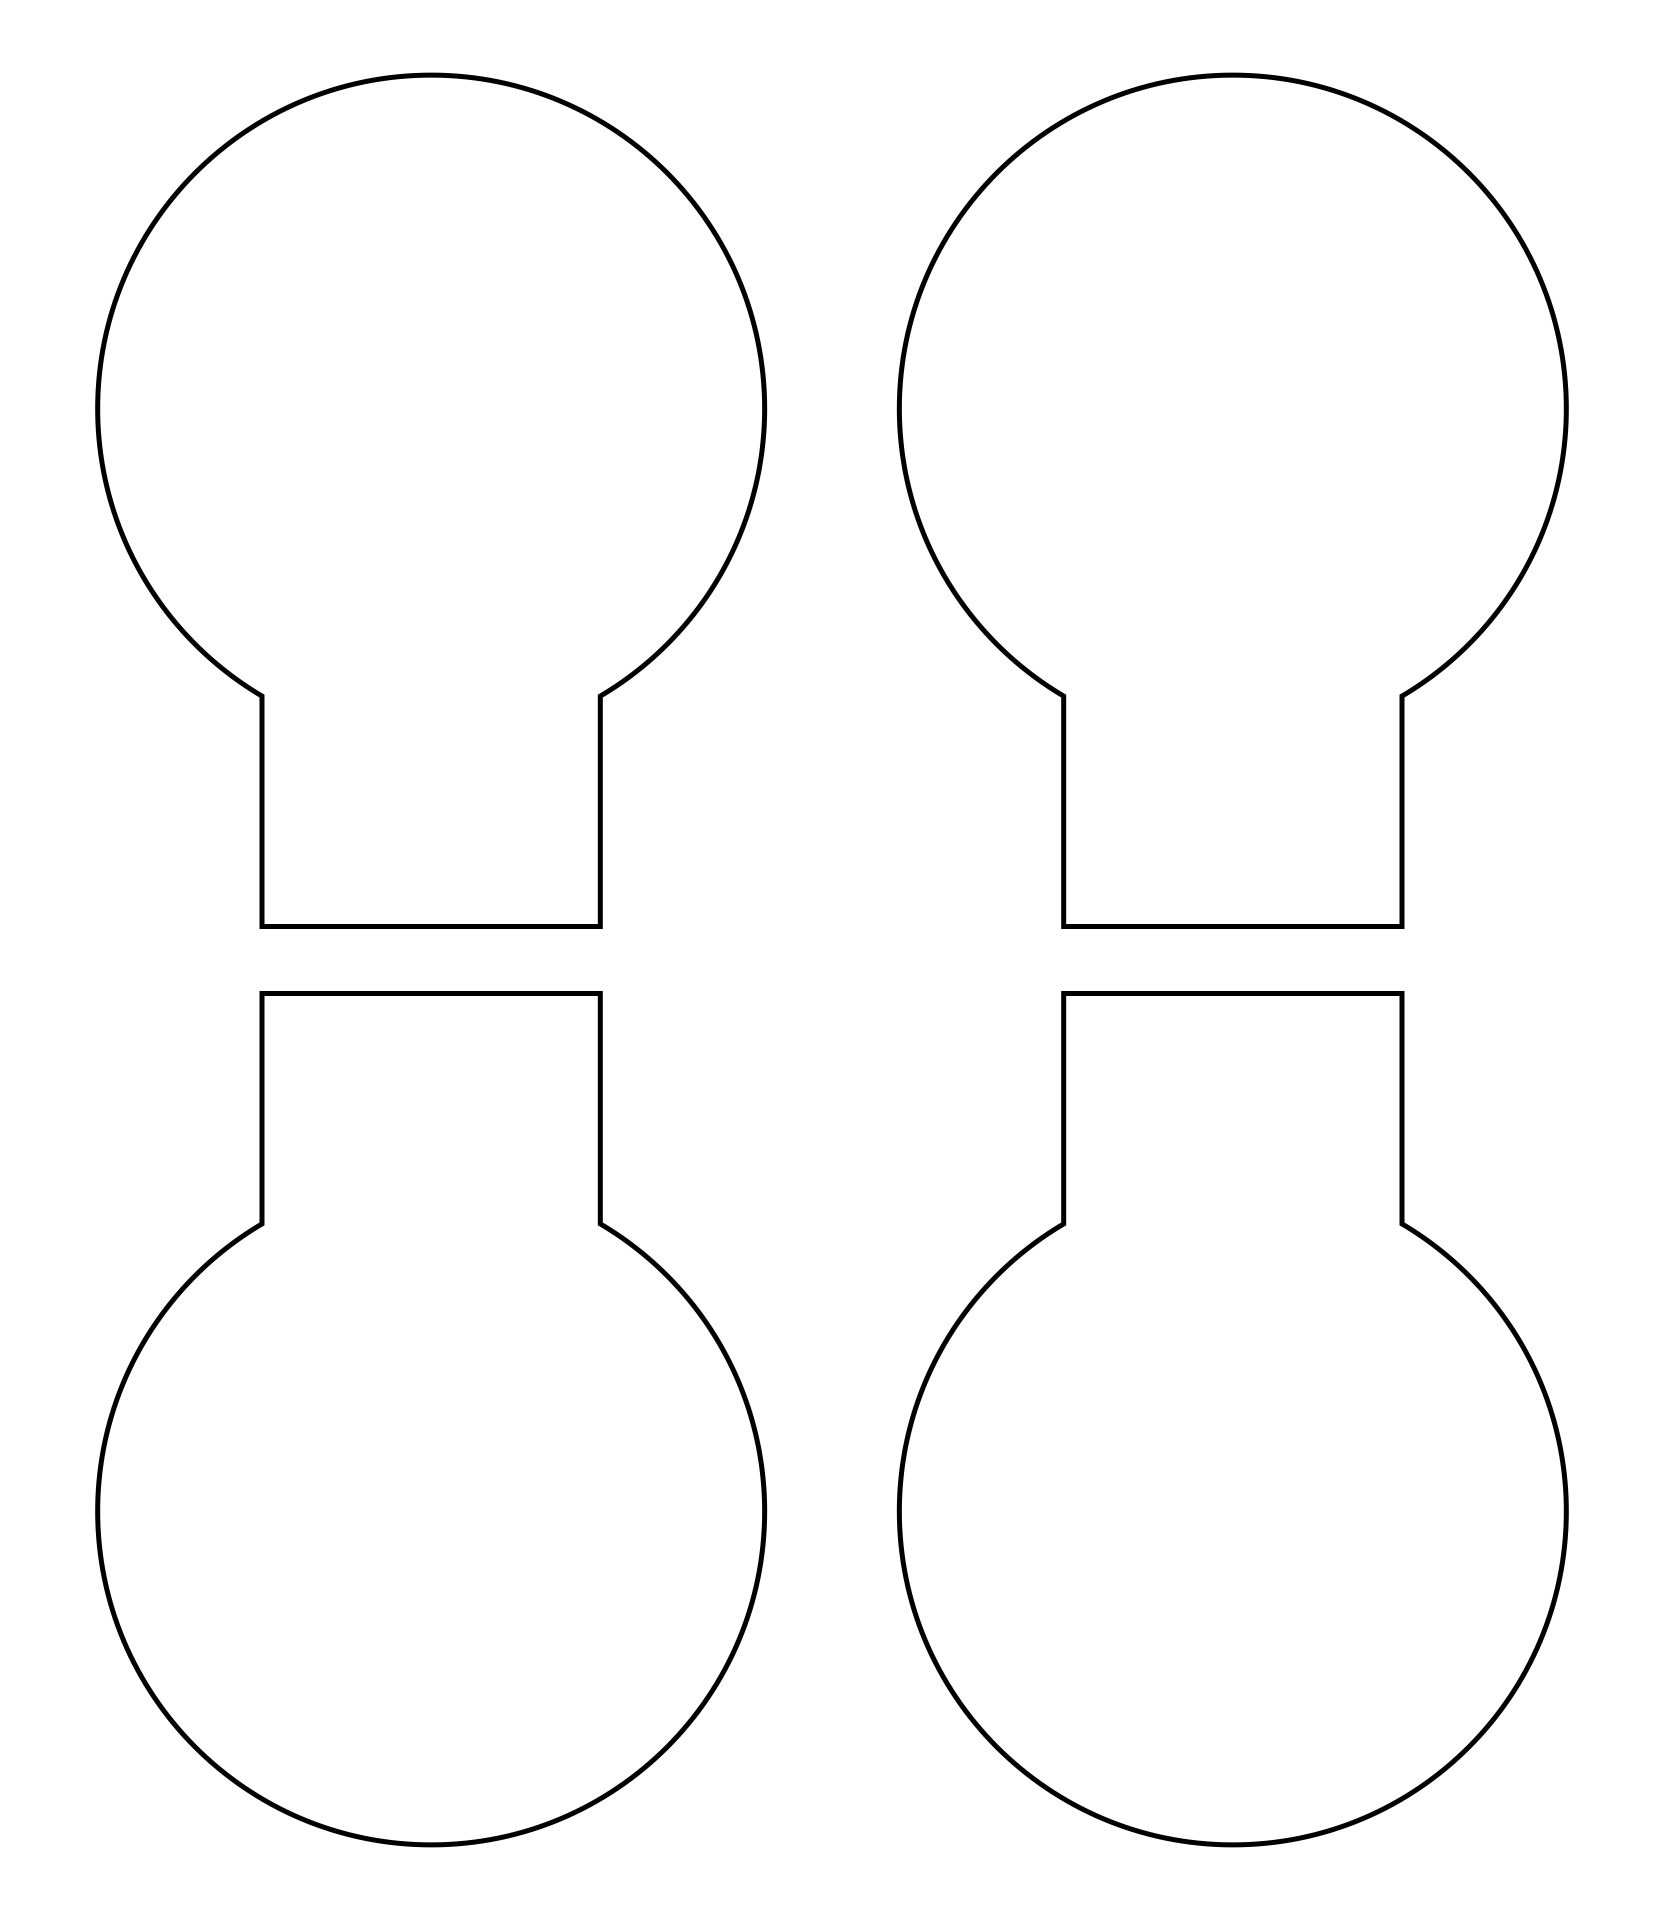 Mickey Mouse Ears Template - Free Printable Download - AB Crafty